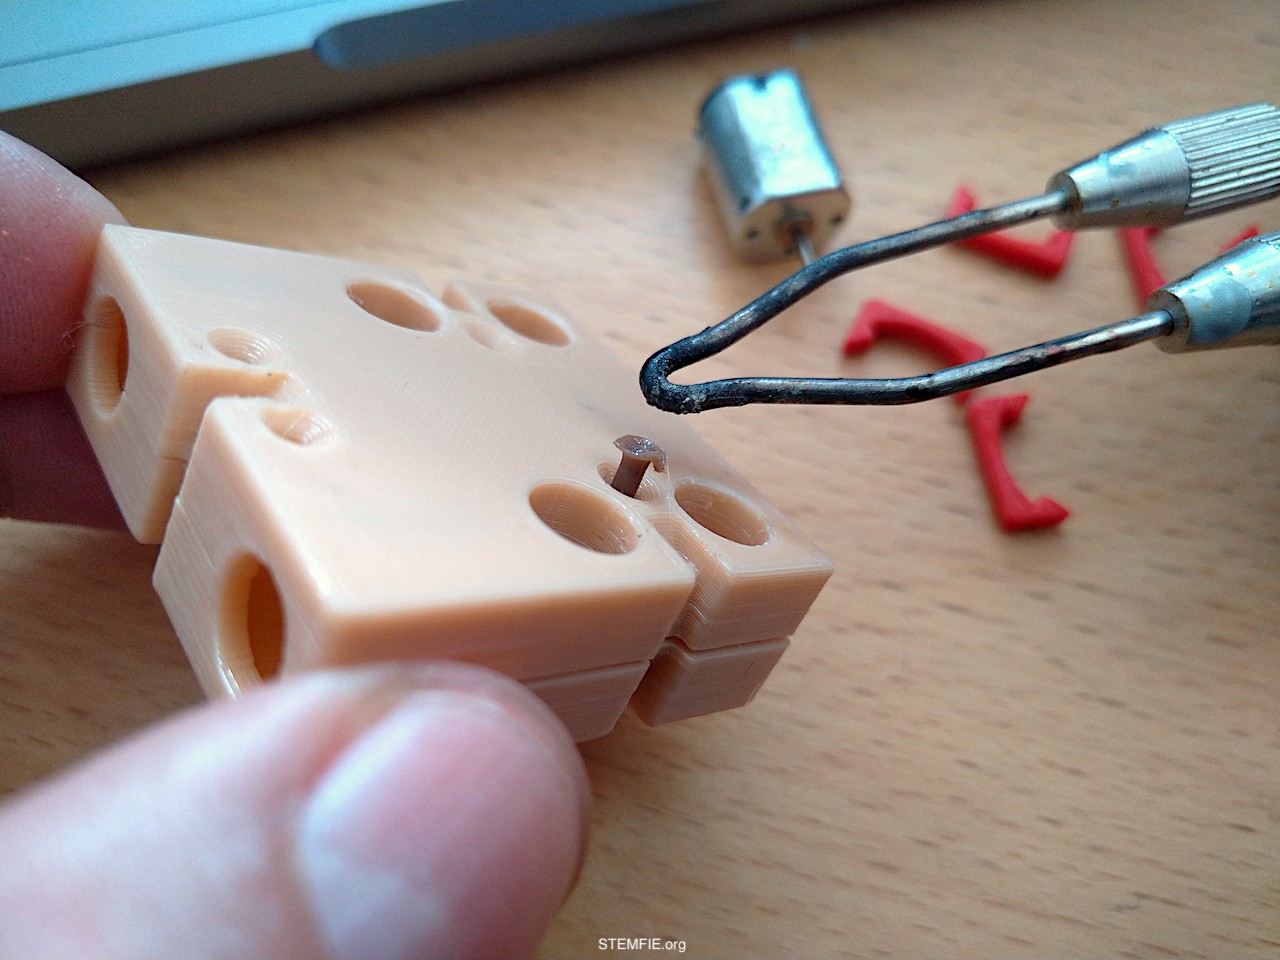 STEMFIE.org Clamp for motor enclosure and 1.75 mm filament riveting v007